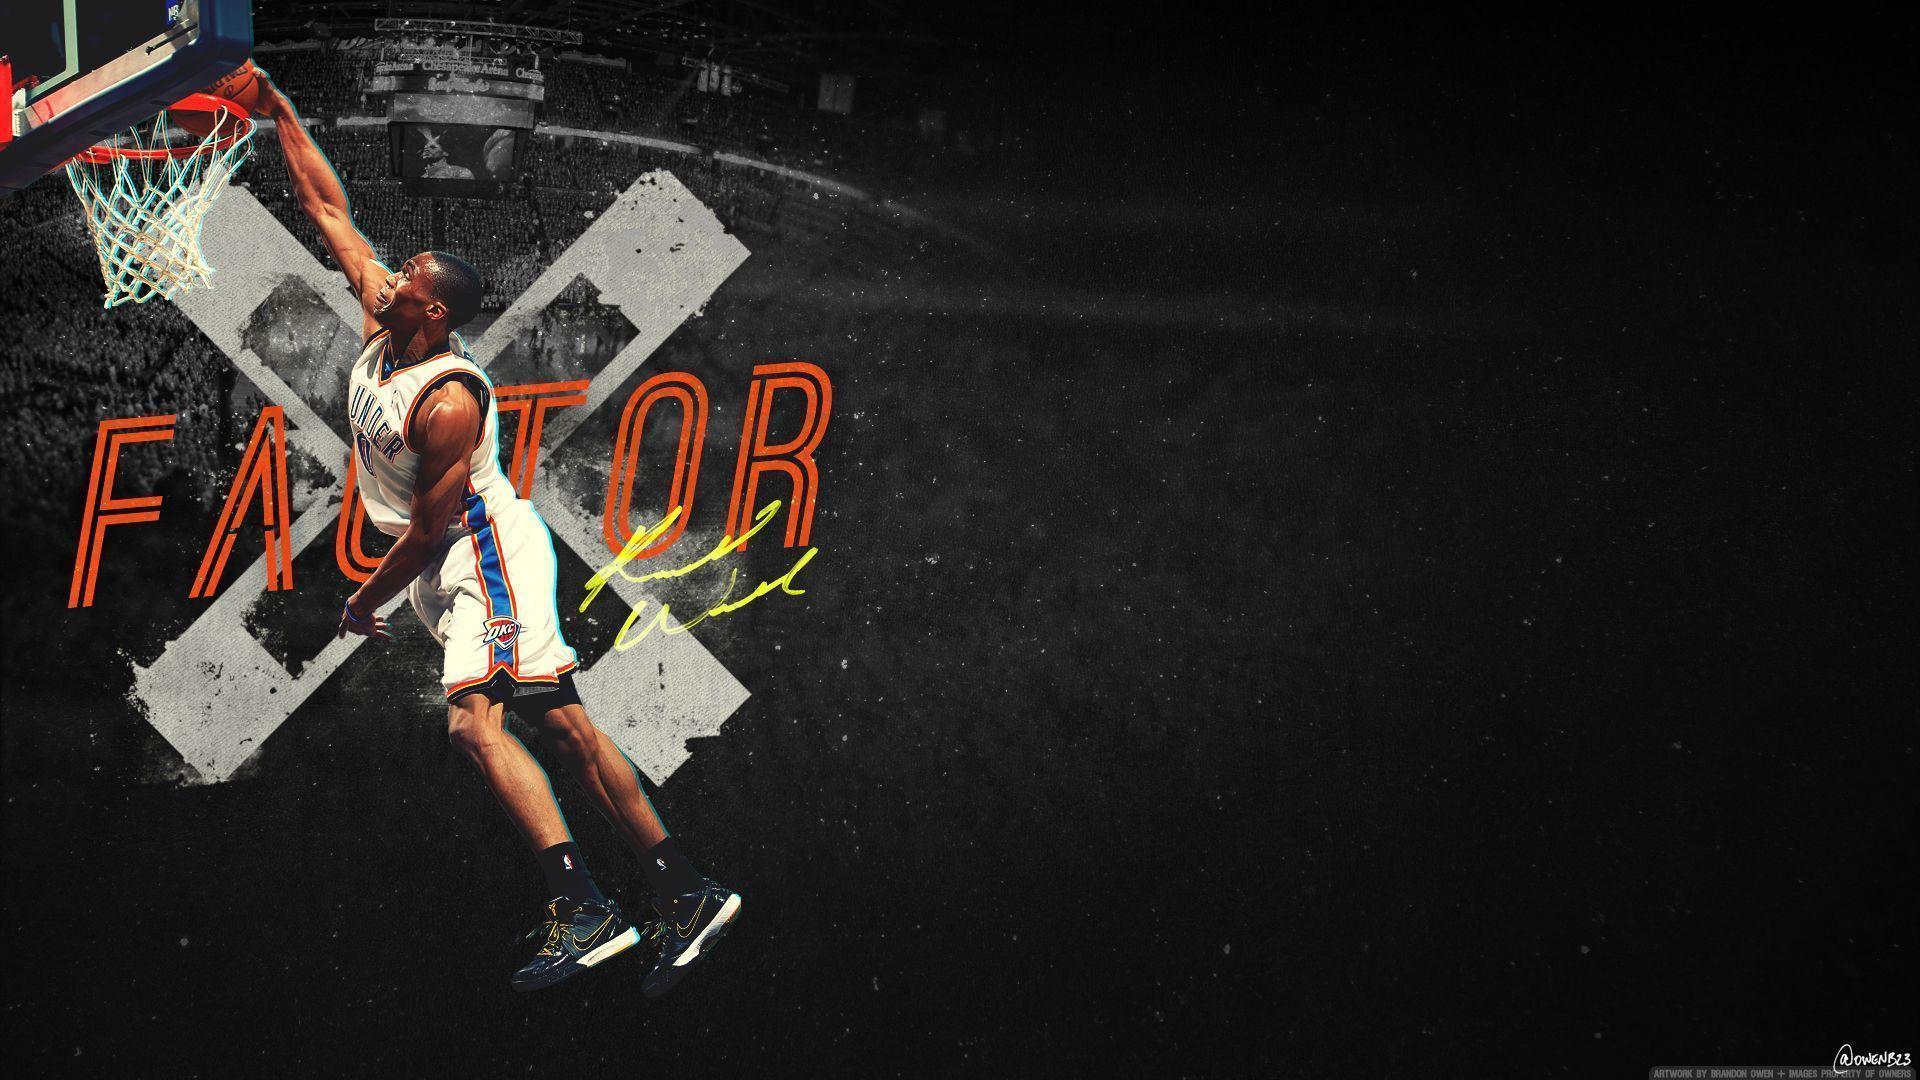 Russell Westbrook Dunking Wallpapers HD